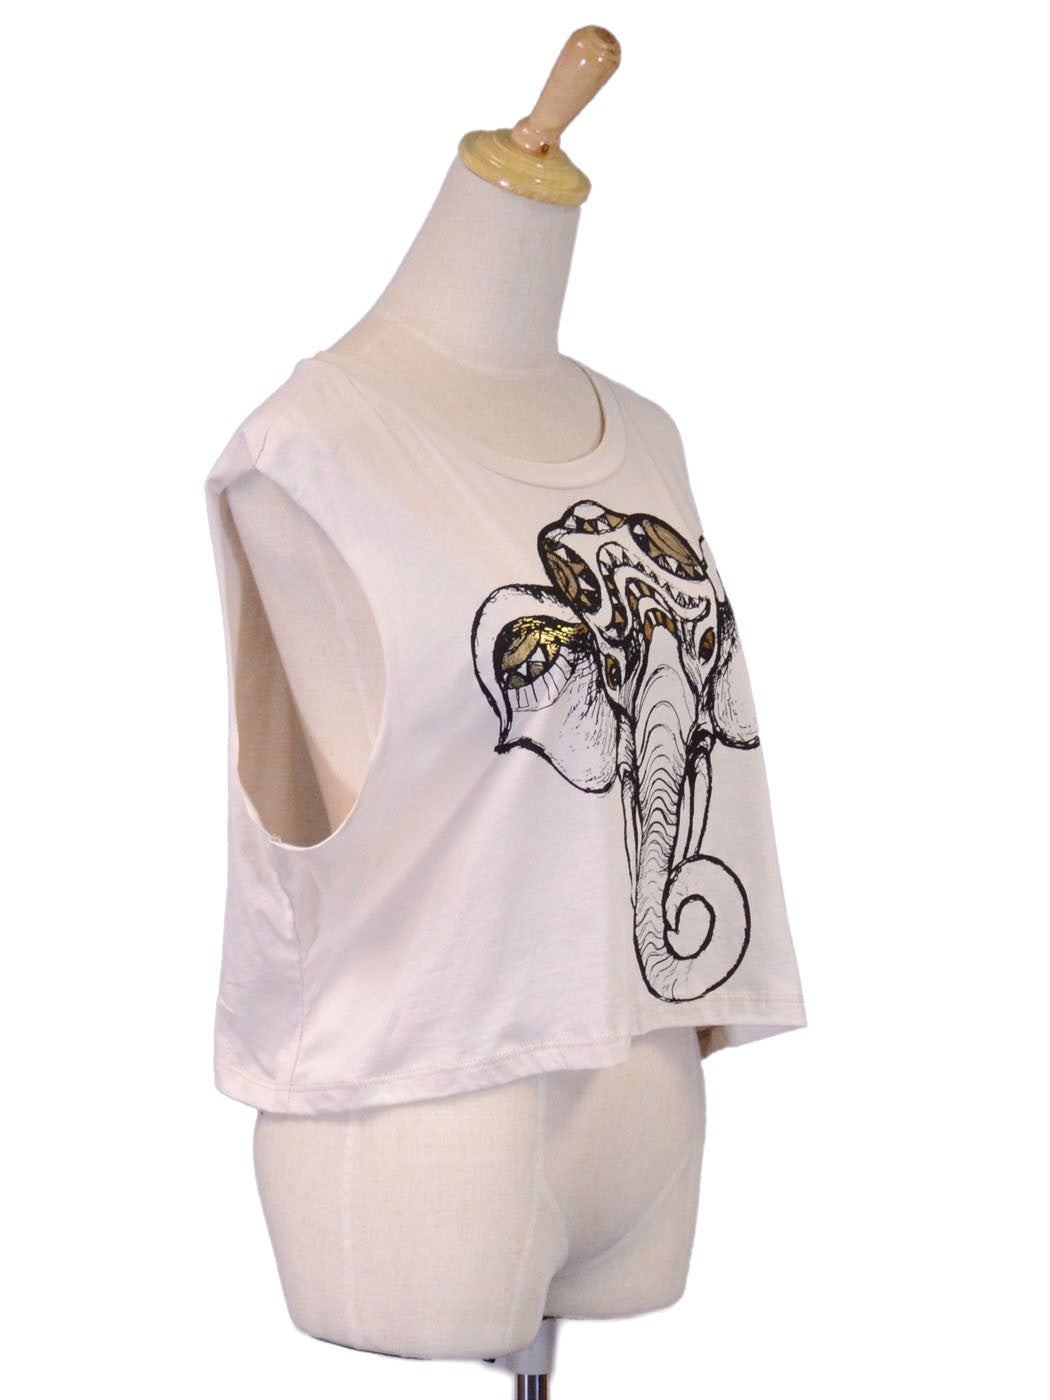 Audrey 3+1 Fun Casual Animal Elephant Print Sleeveless Cropped Knit Top